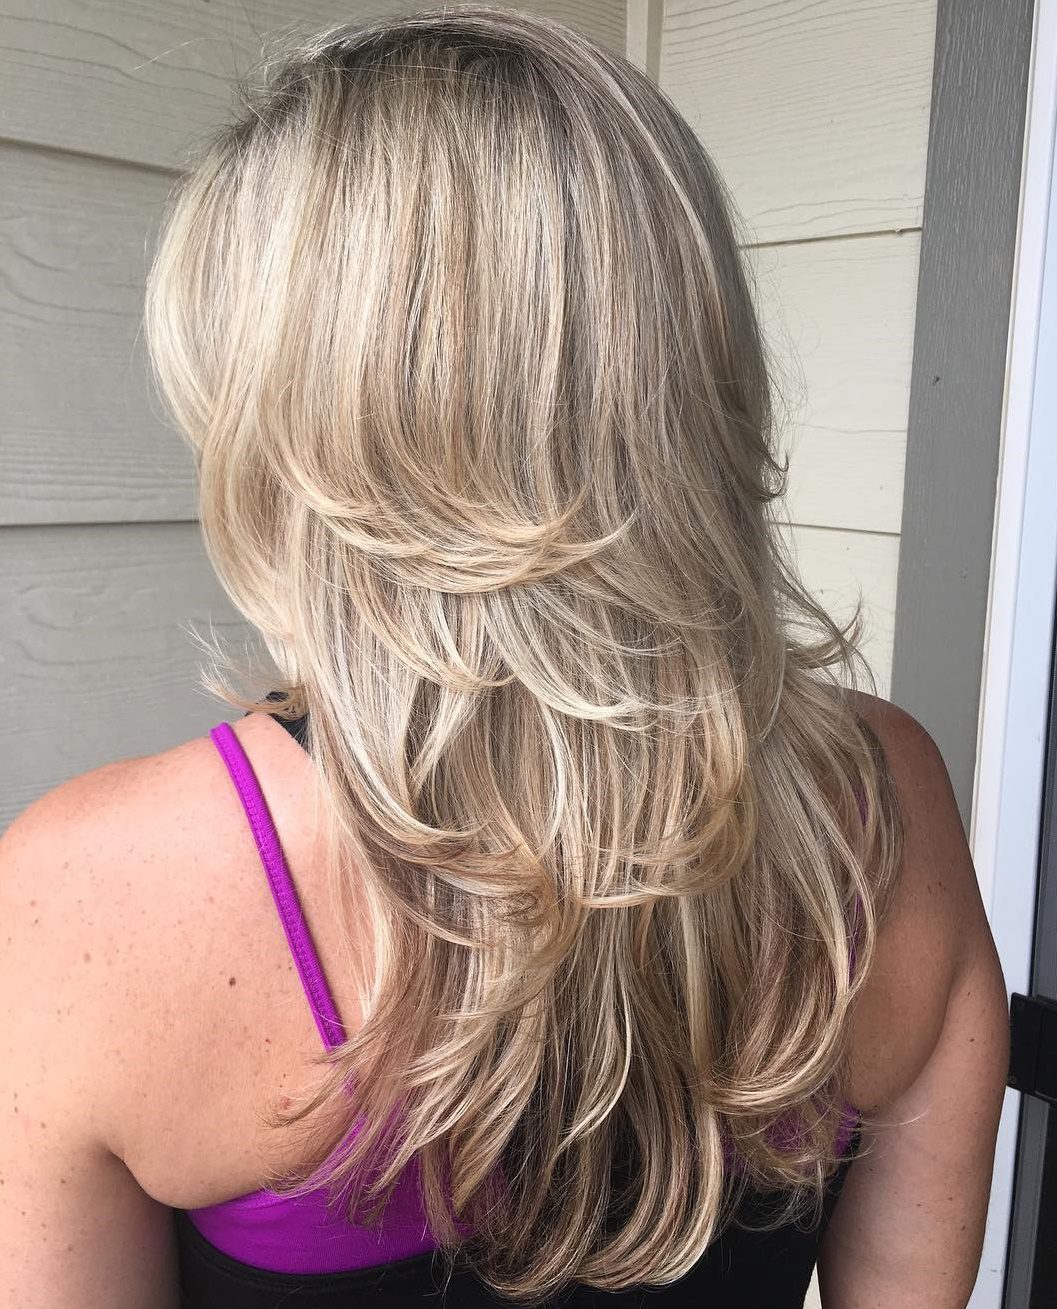 Blonde Textured Cut with Angled Layers